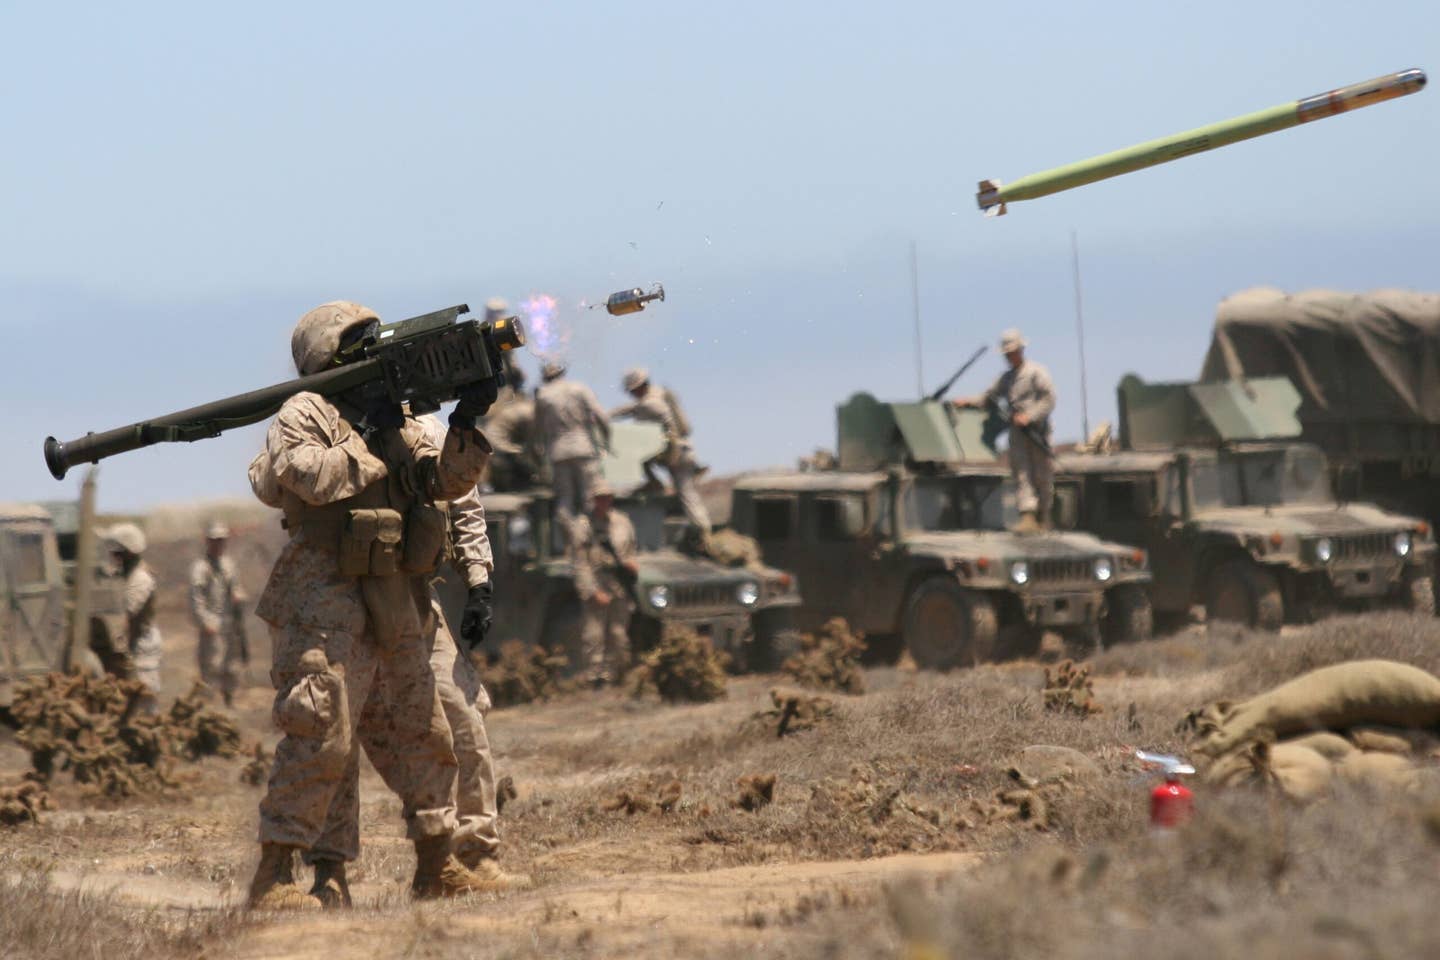 A Marine fires an FIM-92A Stinger missile at an unmanned aerial target during training at San Clemente Island in 2009. <em>Credit: Christopher O'Quin, U.S. Marine Corps</em>